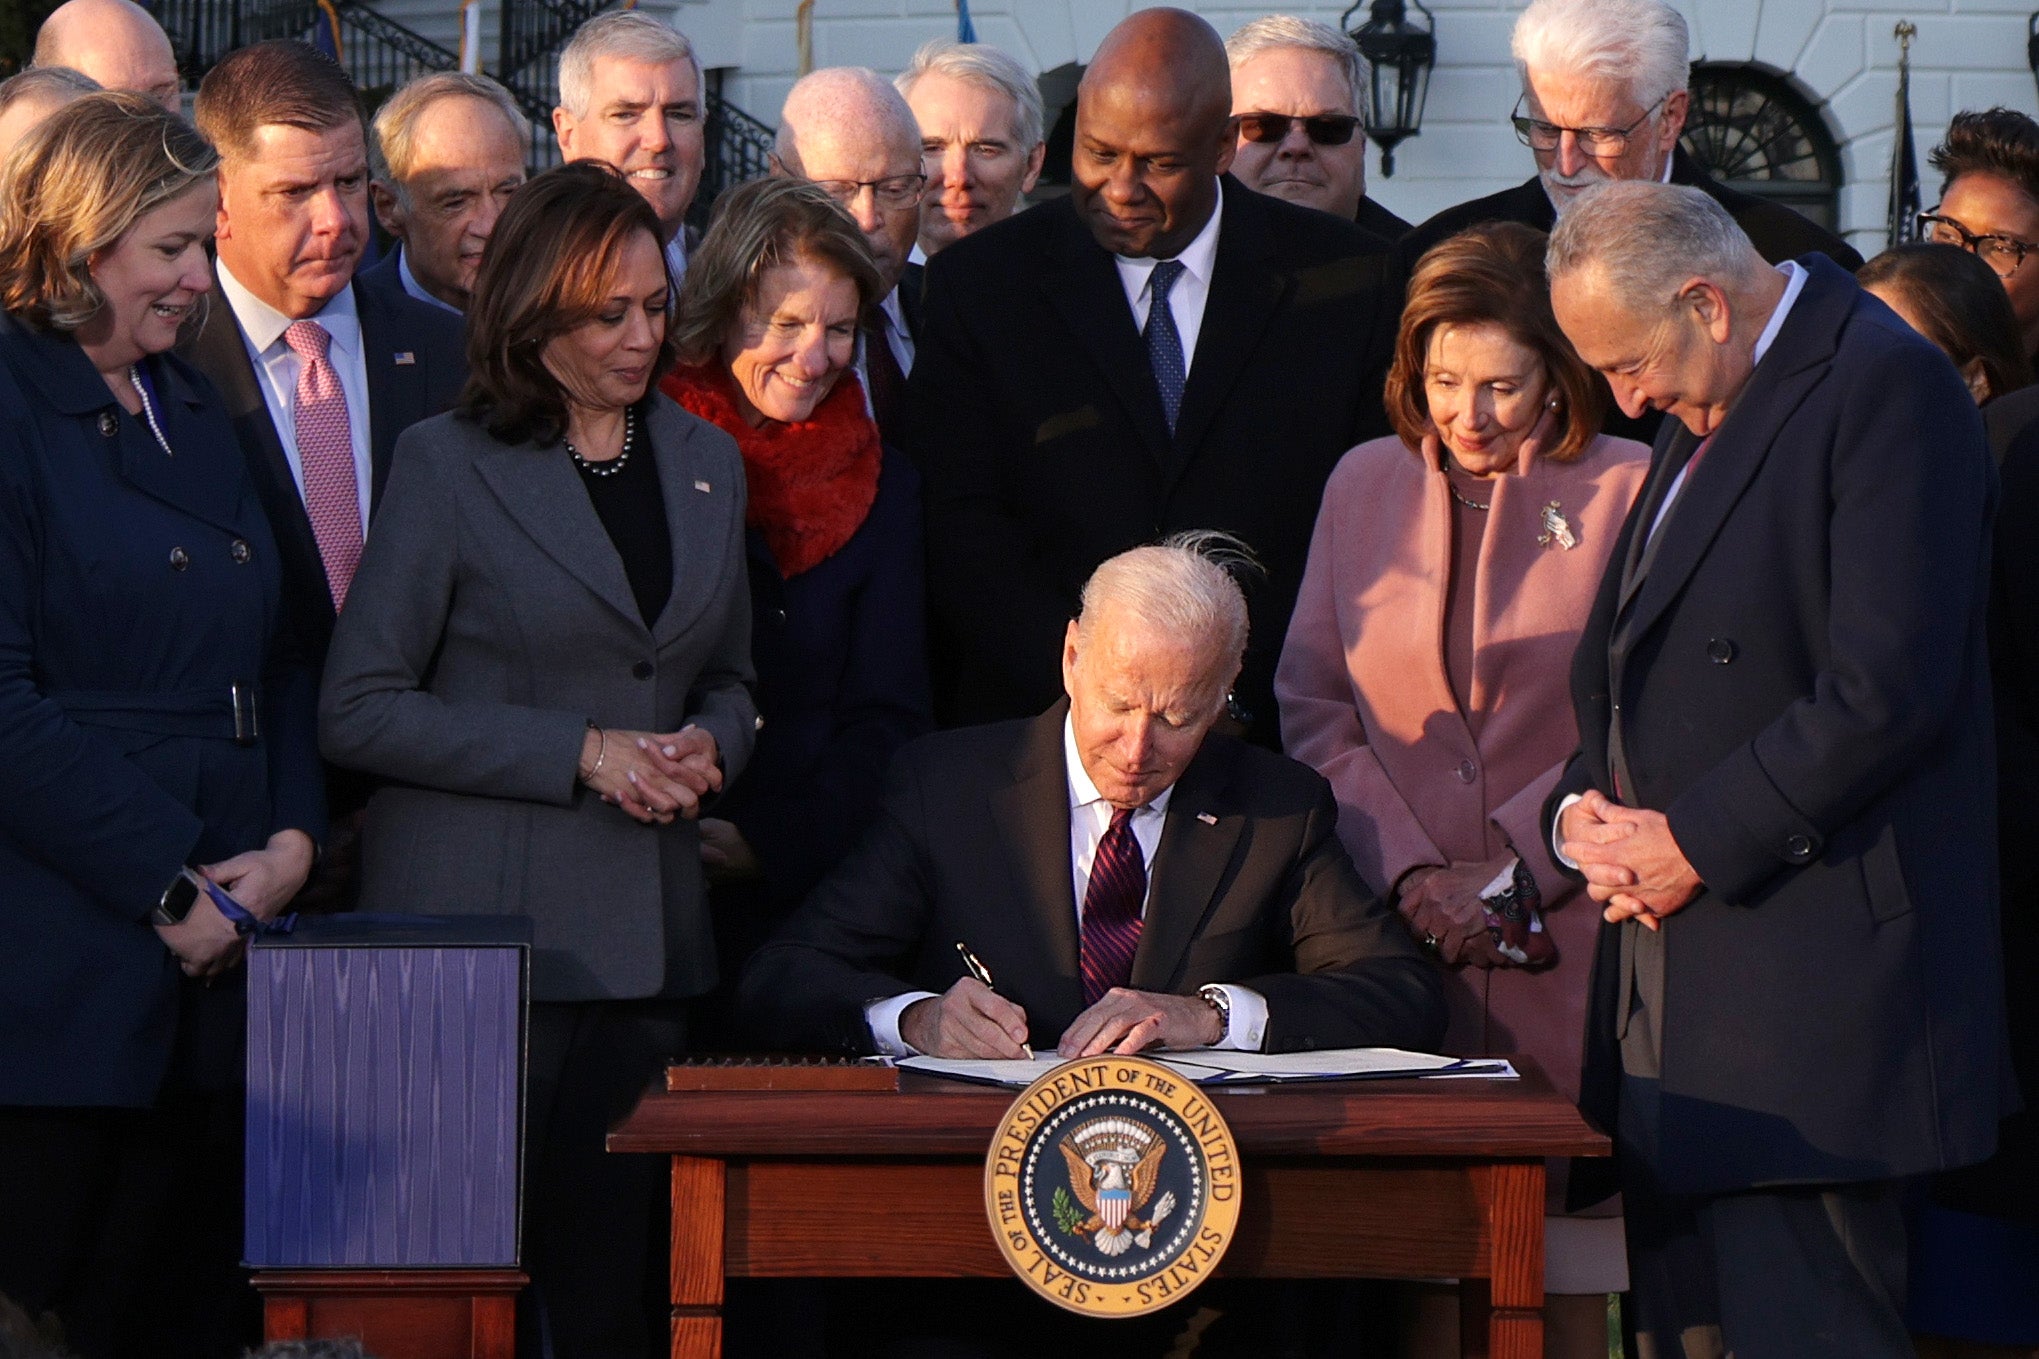  U.S. President Joe Biden signs the Infrastructure Investment and Jobs Act as he is surrounded by lawmakers and members of his Cabinet during a ceremony on the South Lawn at the White House on November 15, 2021 in Washington, DC. The $1.2 trillion package will provide funds for public infrastructure projects including improvements to the country’s transportation networks, increasing rural broadband access, and projects to modernizing water and energy systems. (Photo by Alex Wong/Getty Images)